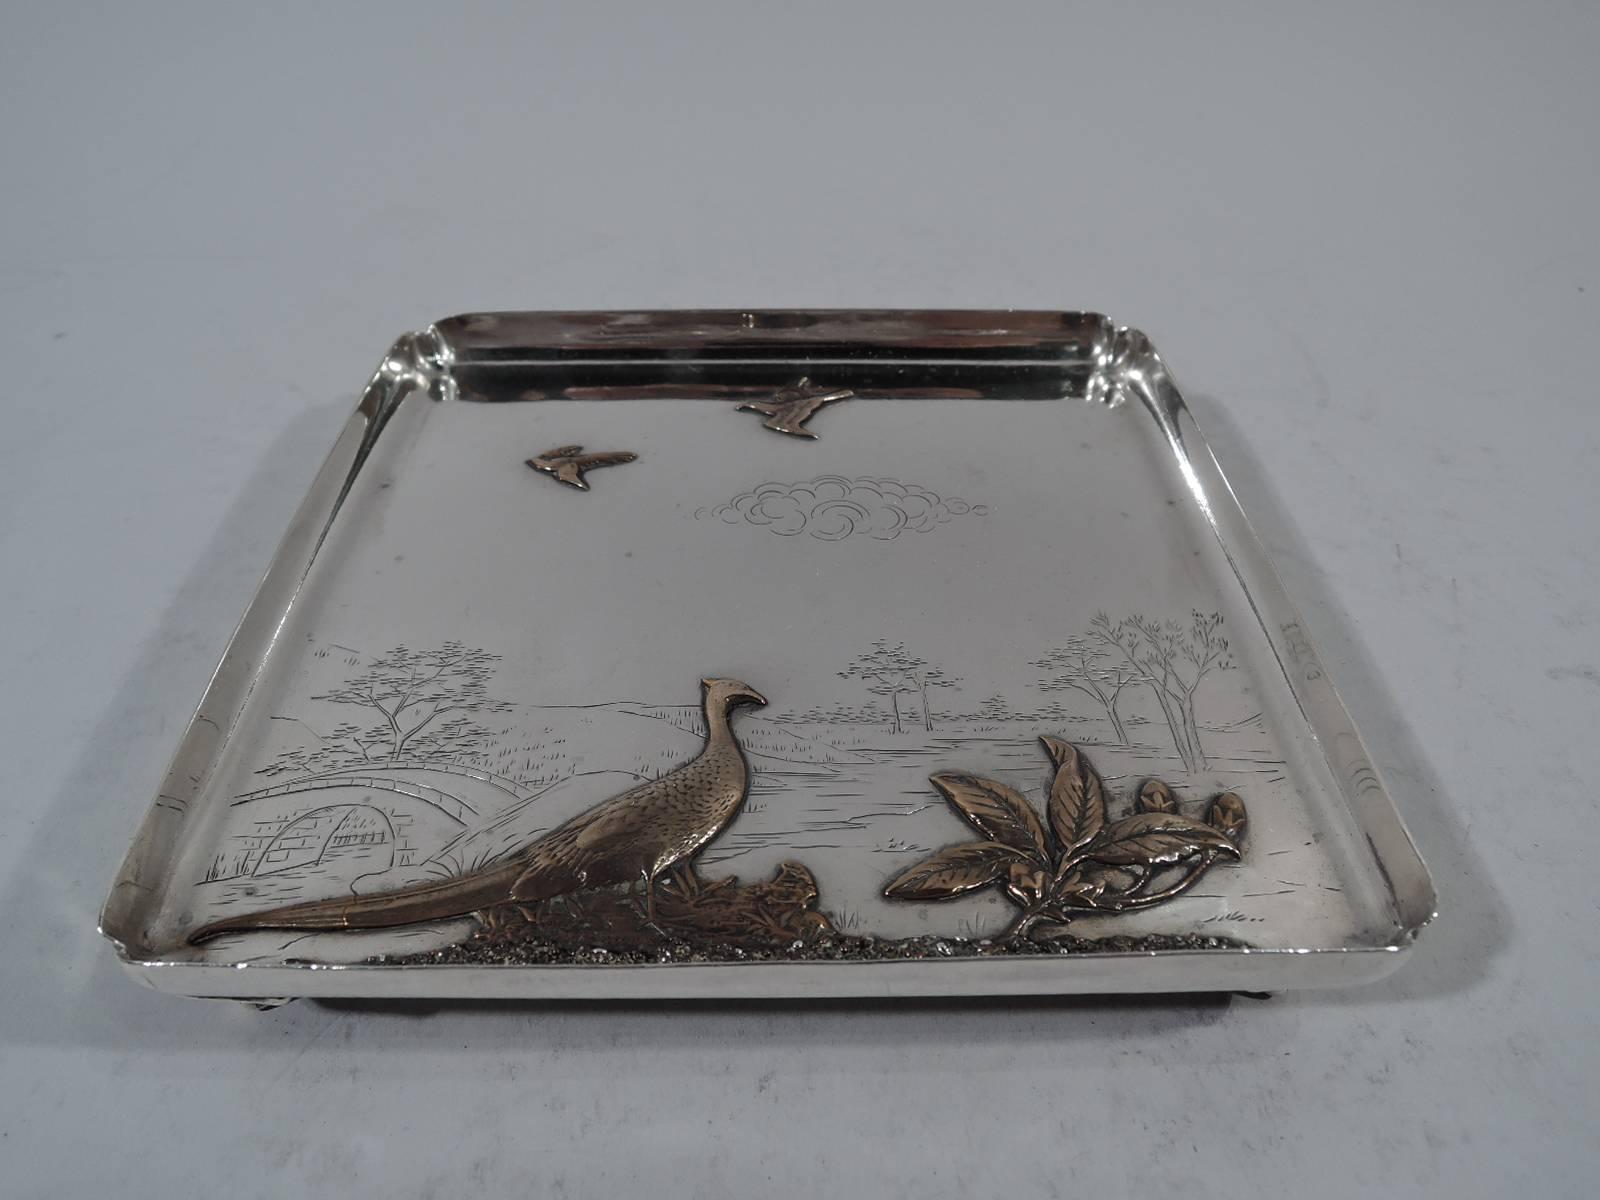 Mixed metal and sterling silver landscape salver. Made by Gorham in Providence in 1881. Square with gently tapering sides and crimped corners with pierced volute scroll supports. Engraved landscape with trees, hills, and stone bridge. In foreground